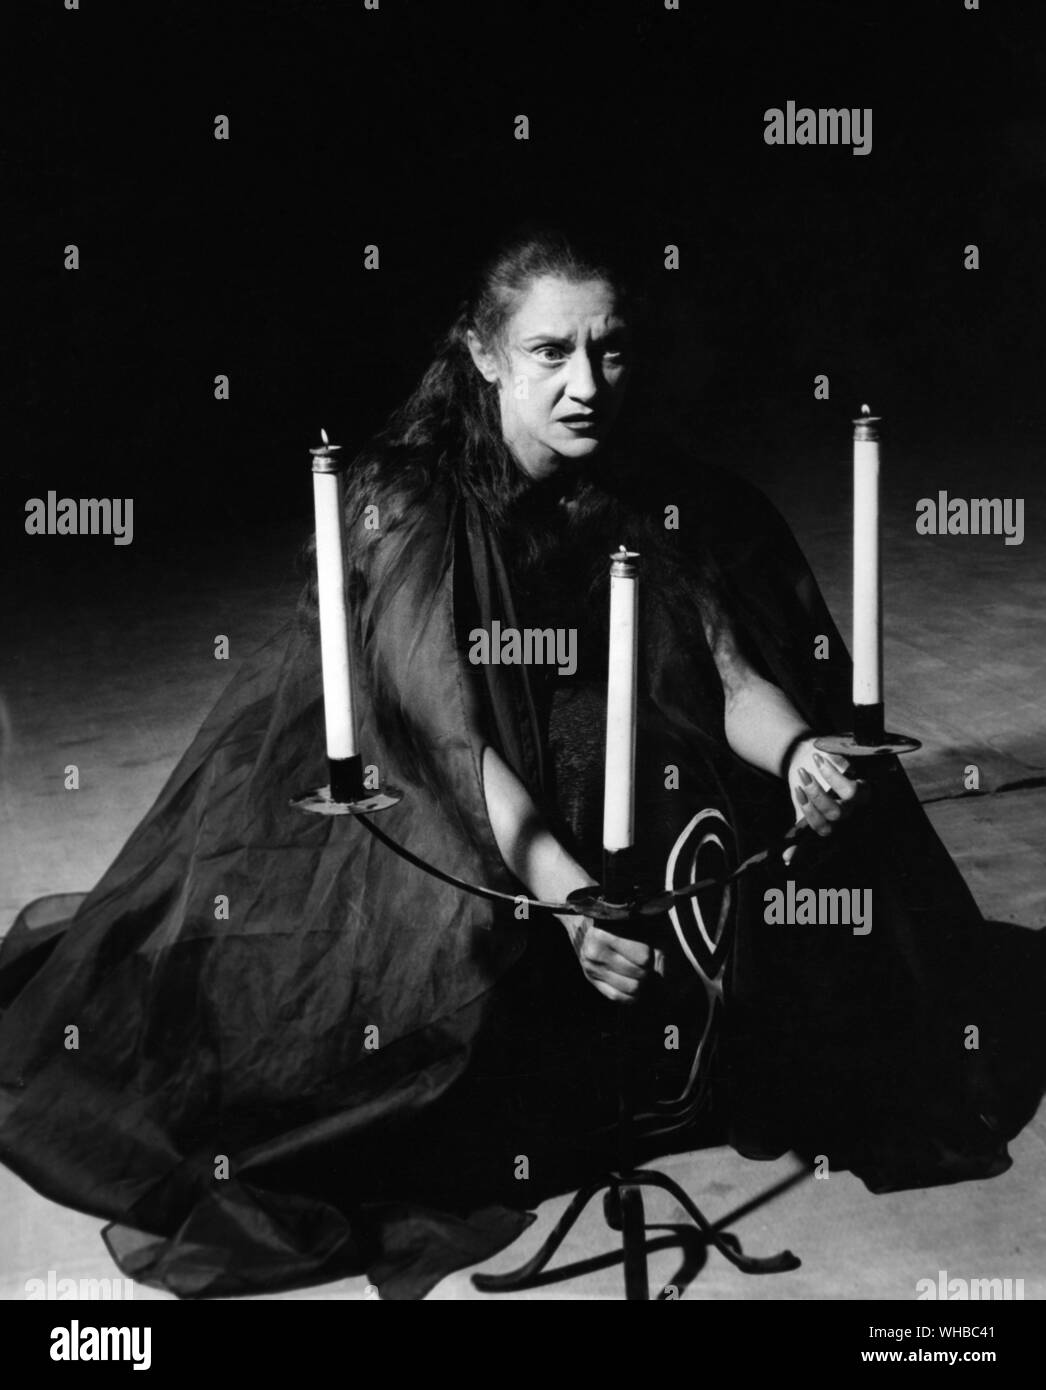 Maria Casares as Lady Macbeth . the sleep walking scene . . The full extent of Lady Macbeth’s guilt is shown in the sleepwalking scene Stock Photo